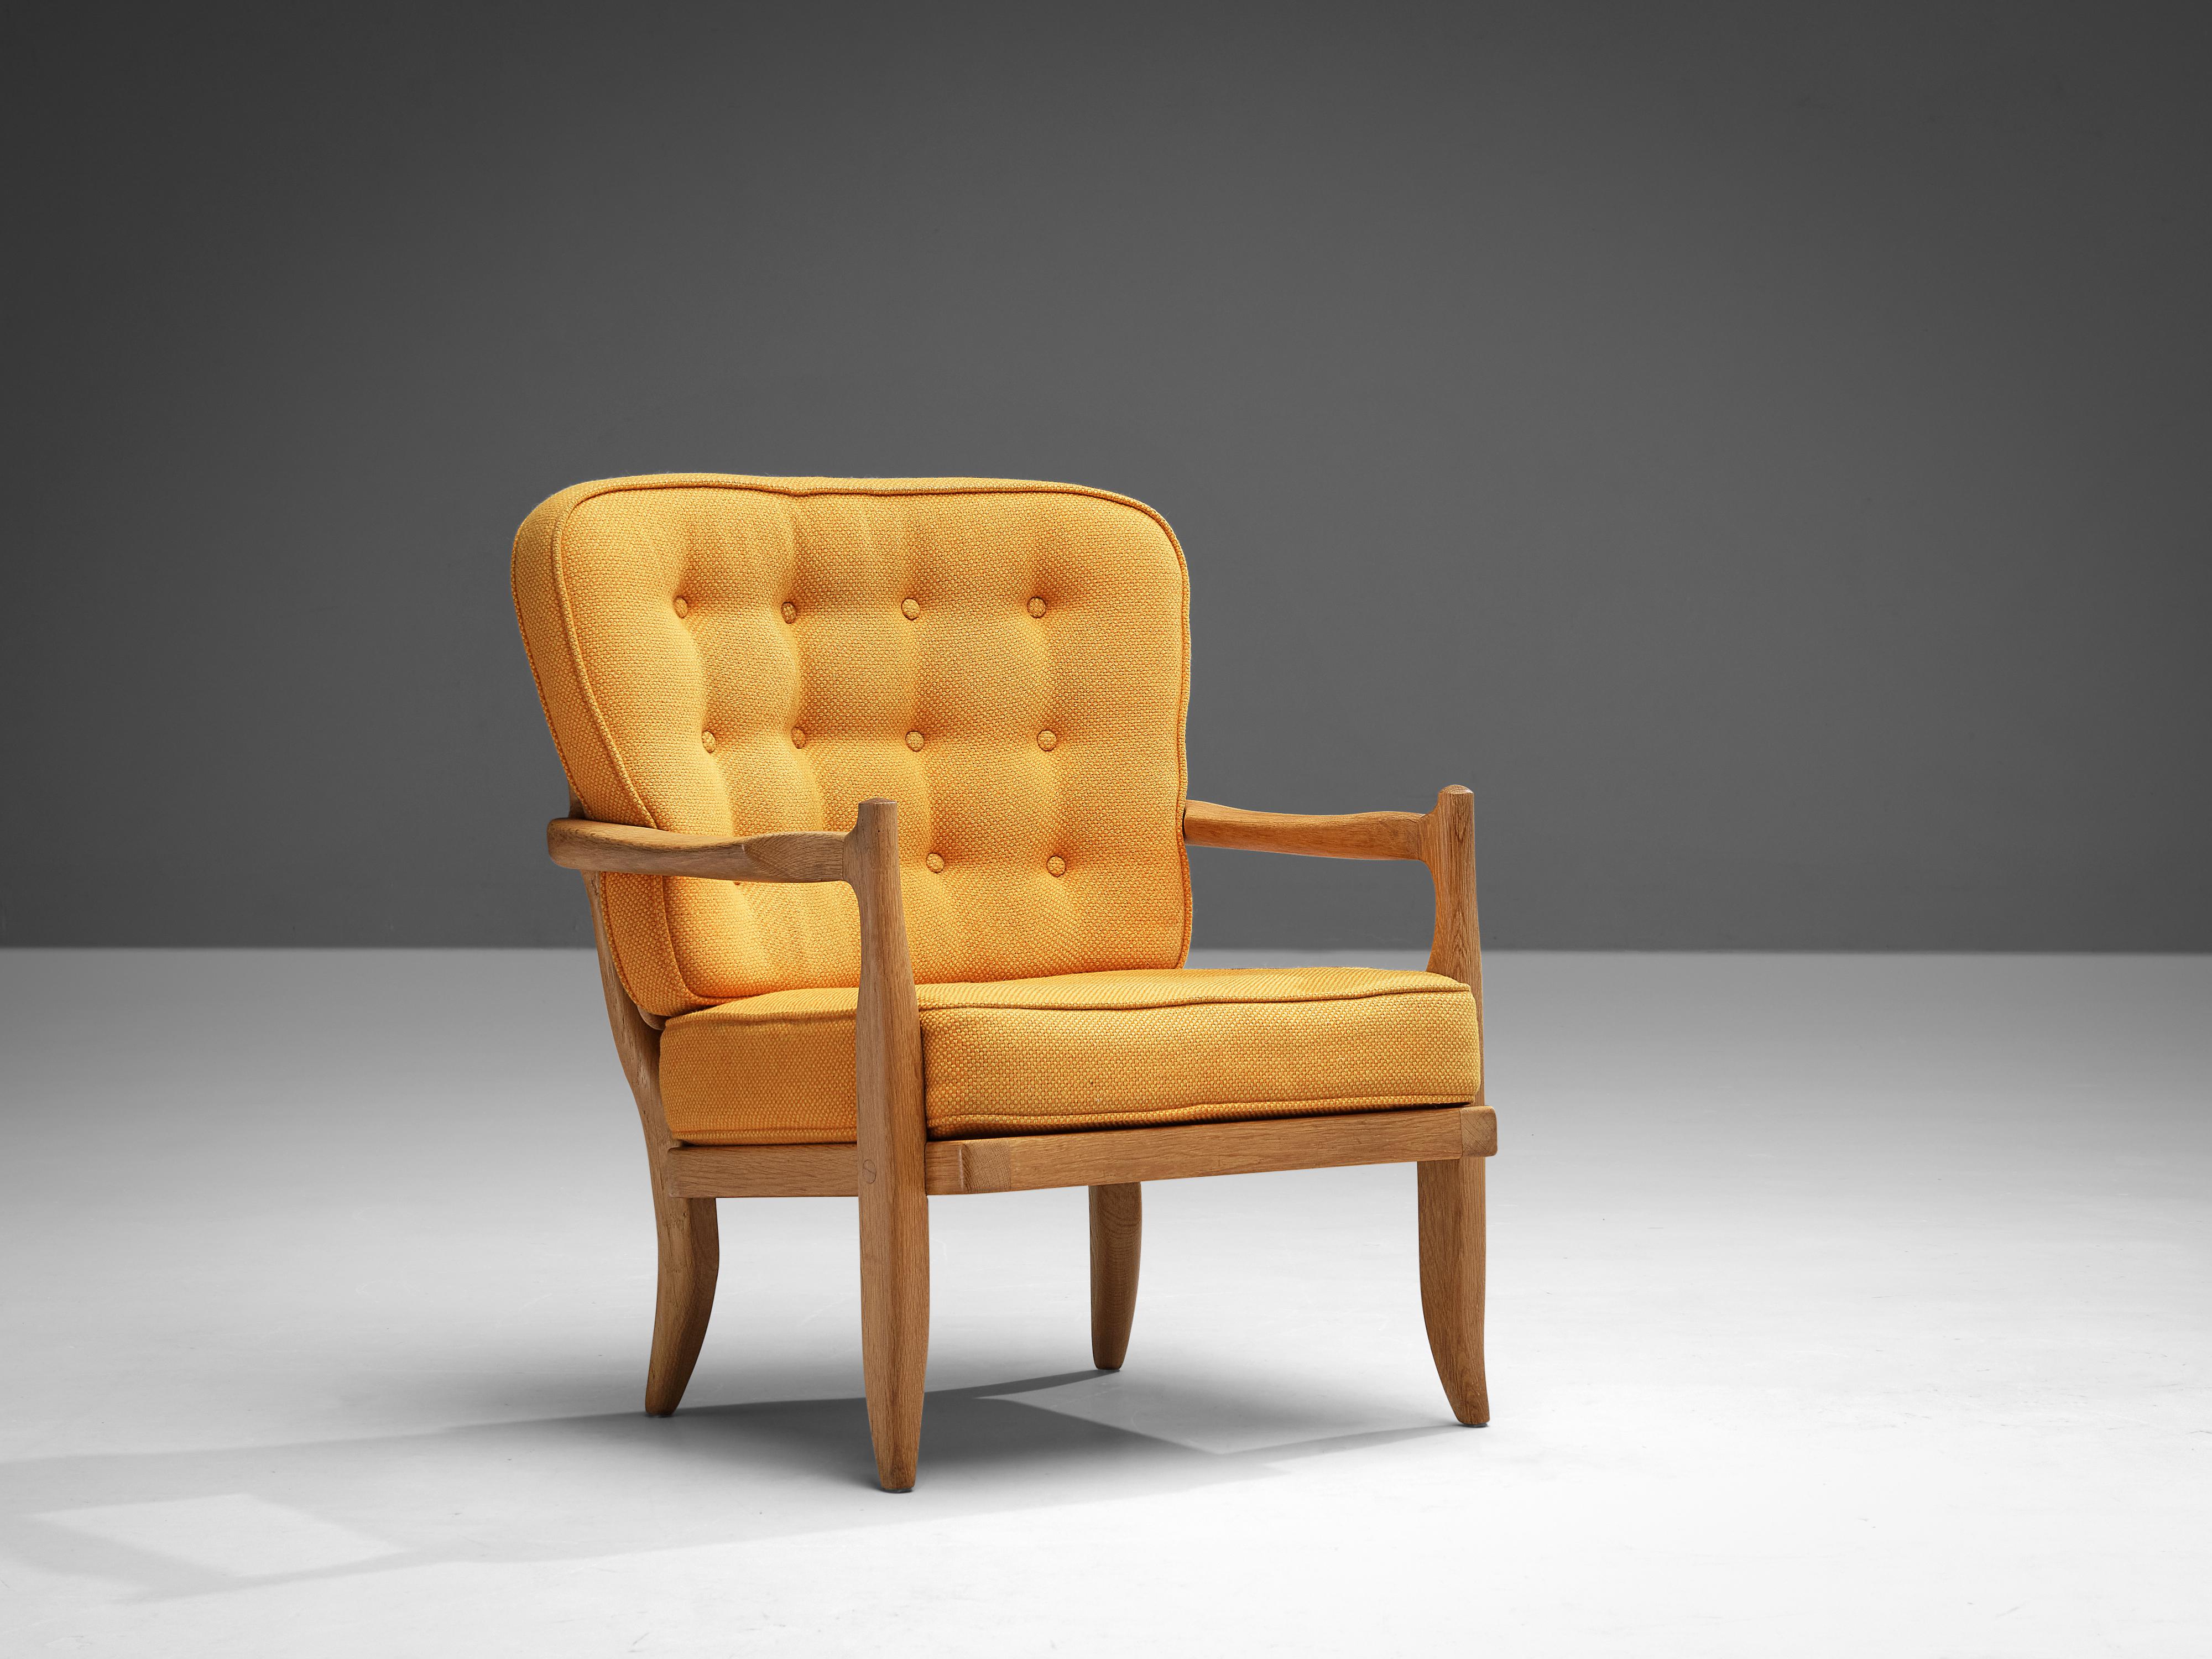 Guillerme & Chambron, armchair model ‘Jose’, oak, fabric, France, 1950s

Characteristic lounge chair by French designer duo Guillerme & Chambron. While the front convinces with its clear appearance, the backrest is surprisingly ornamental with